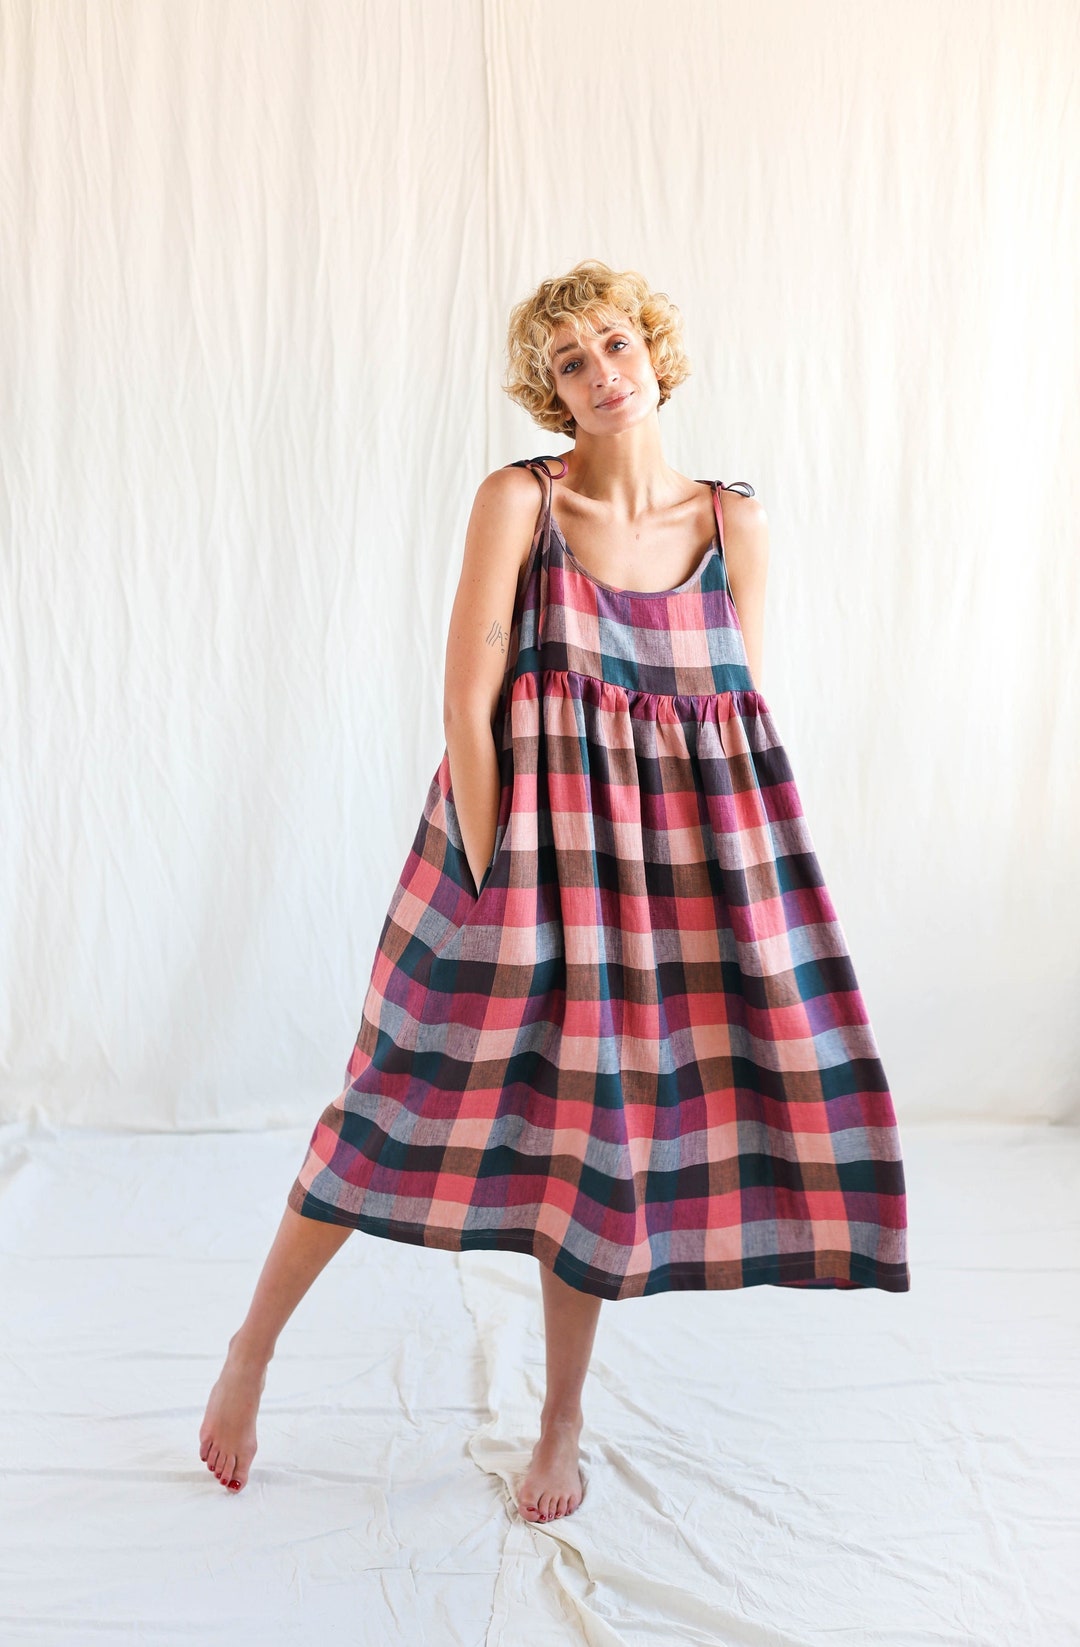 Loose Tie Strap Linen Sundress in Checks Handmade by OFFON Clothing - Etsy